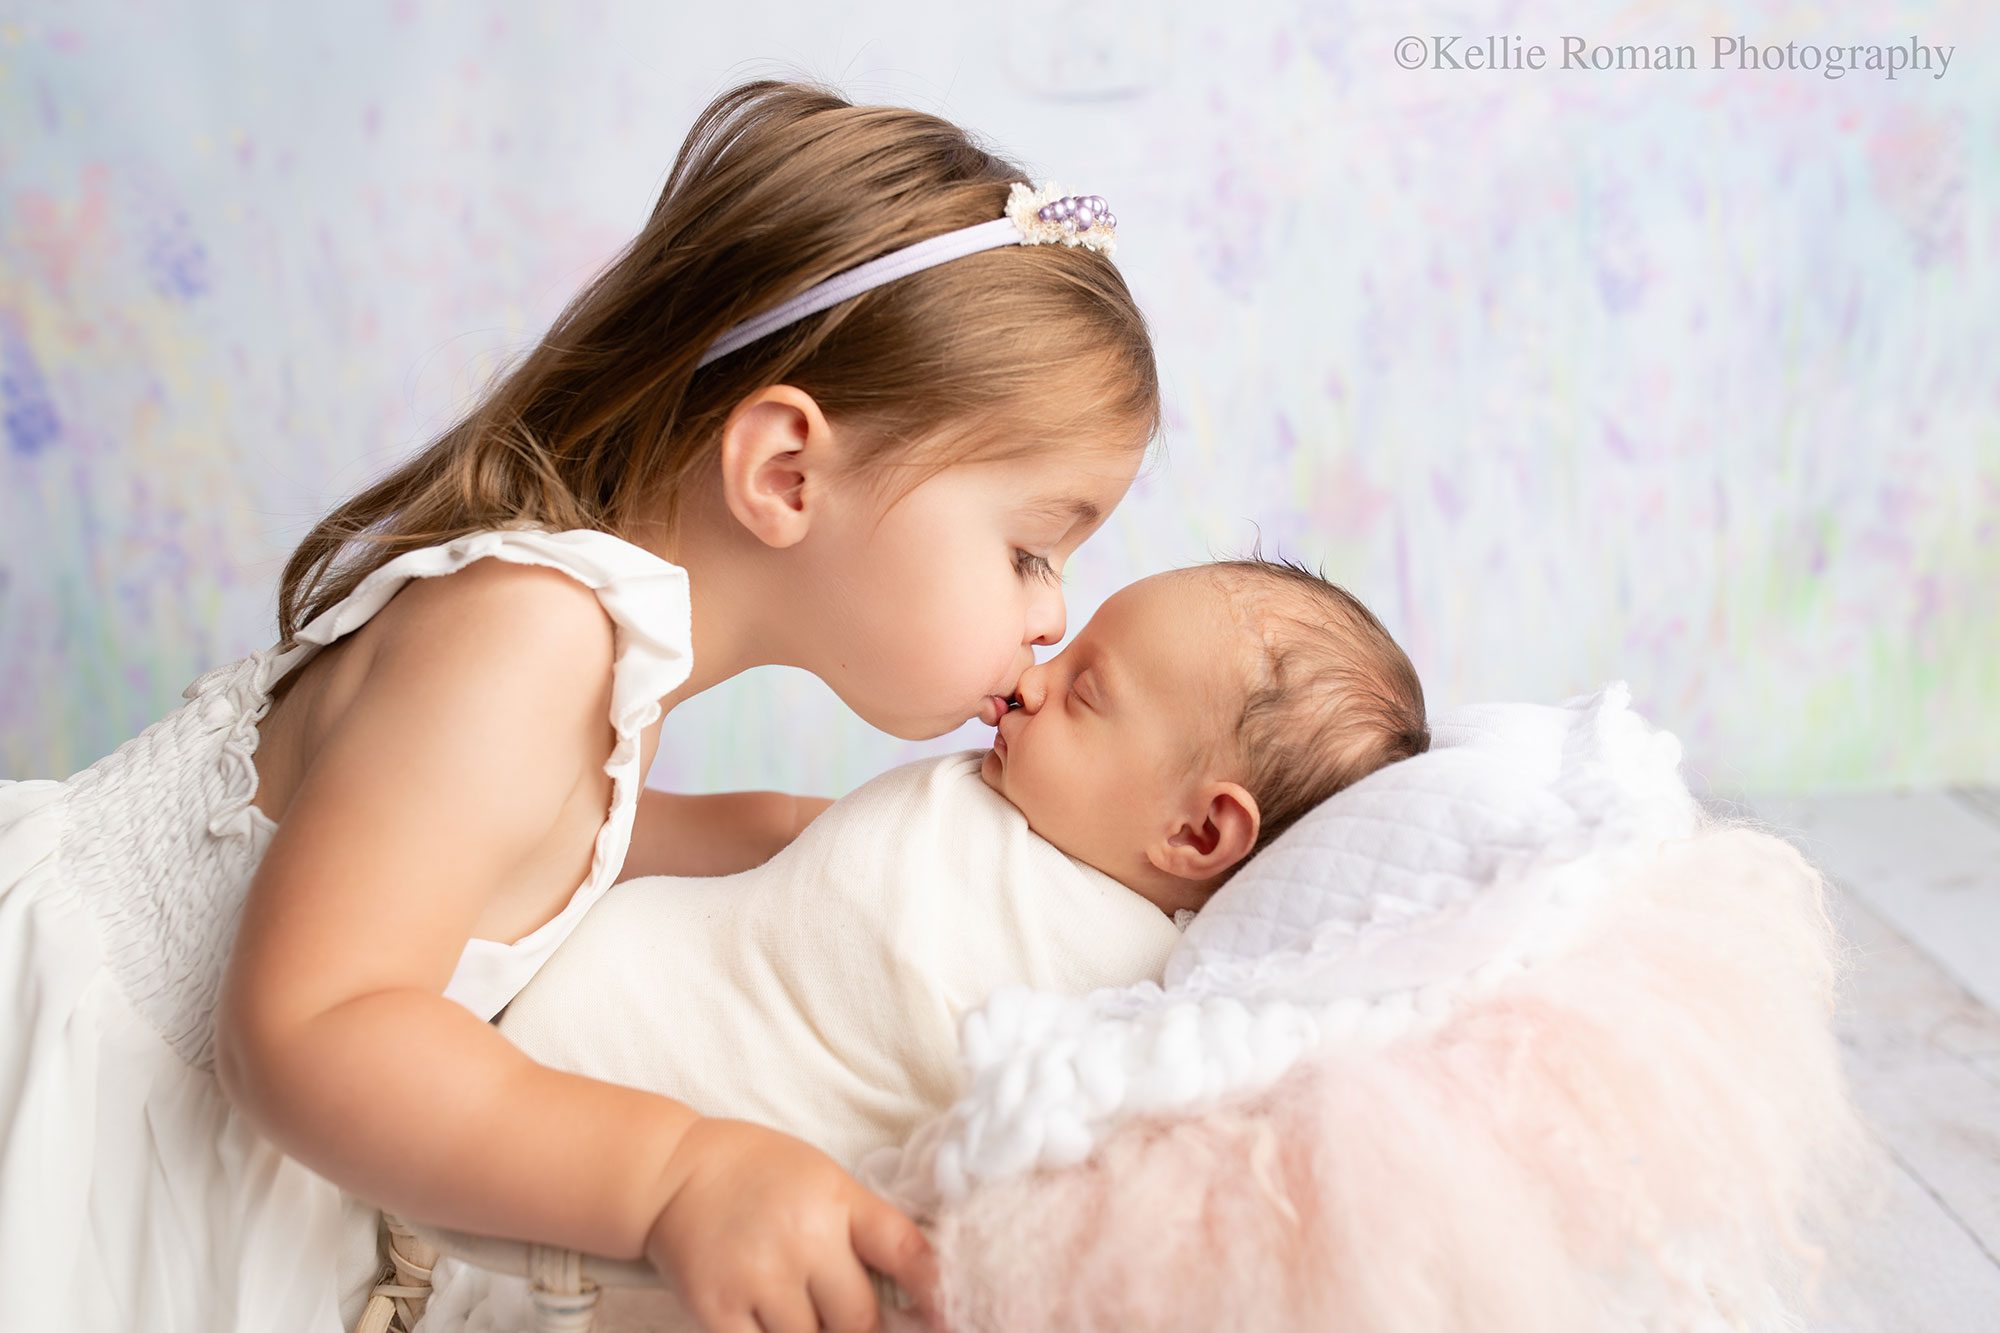 adorable newborn sister. a toddler girl is leaning over and giving her newborn sister a kiss on the nose